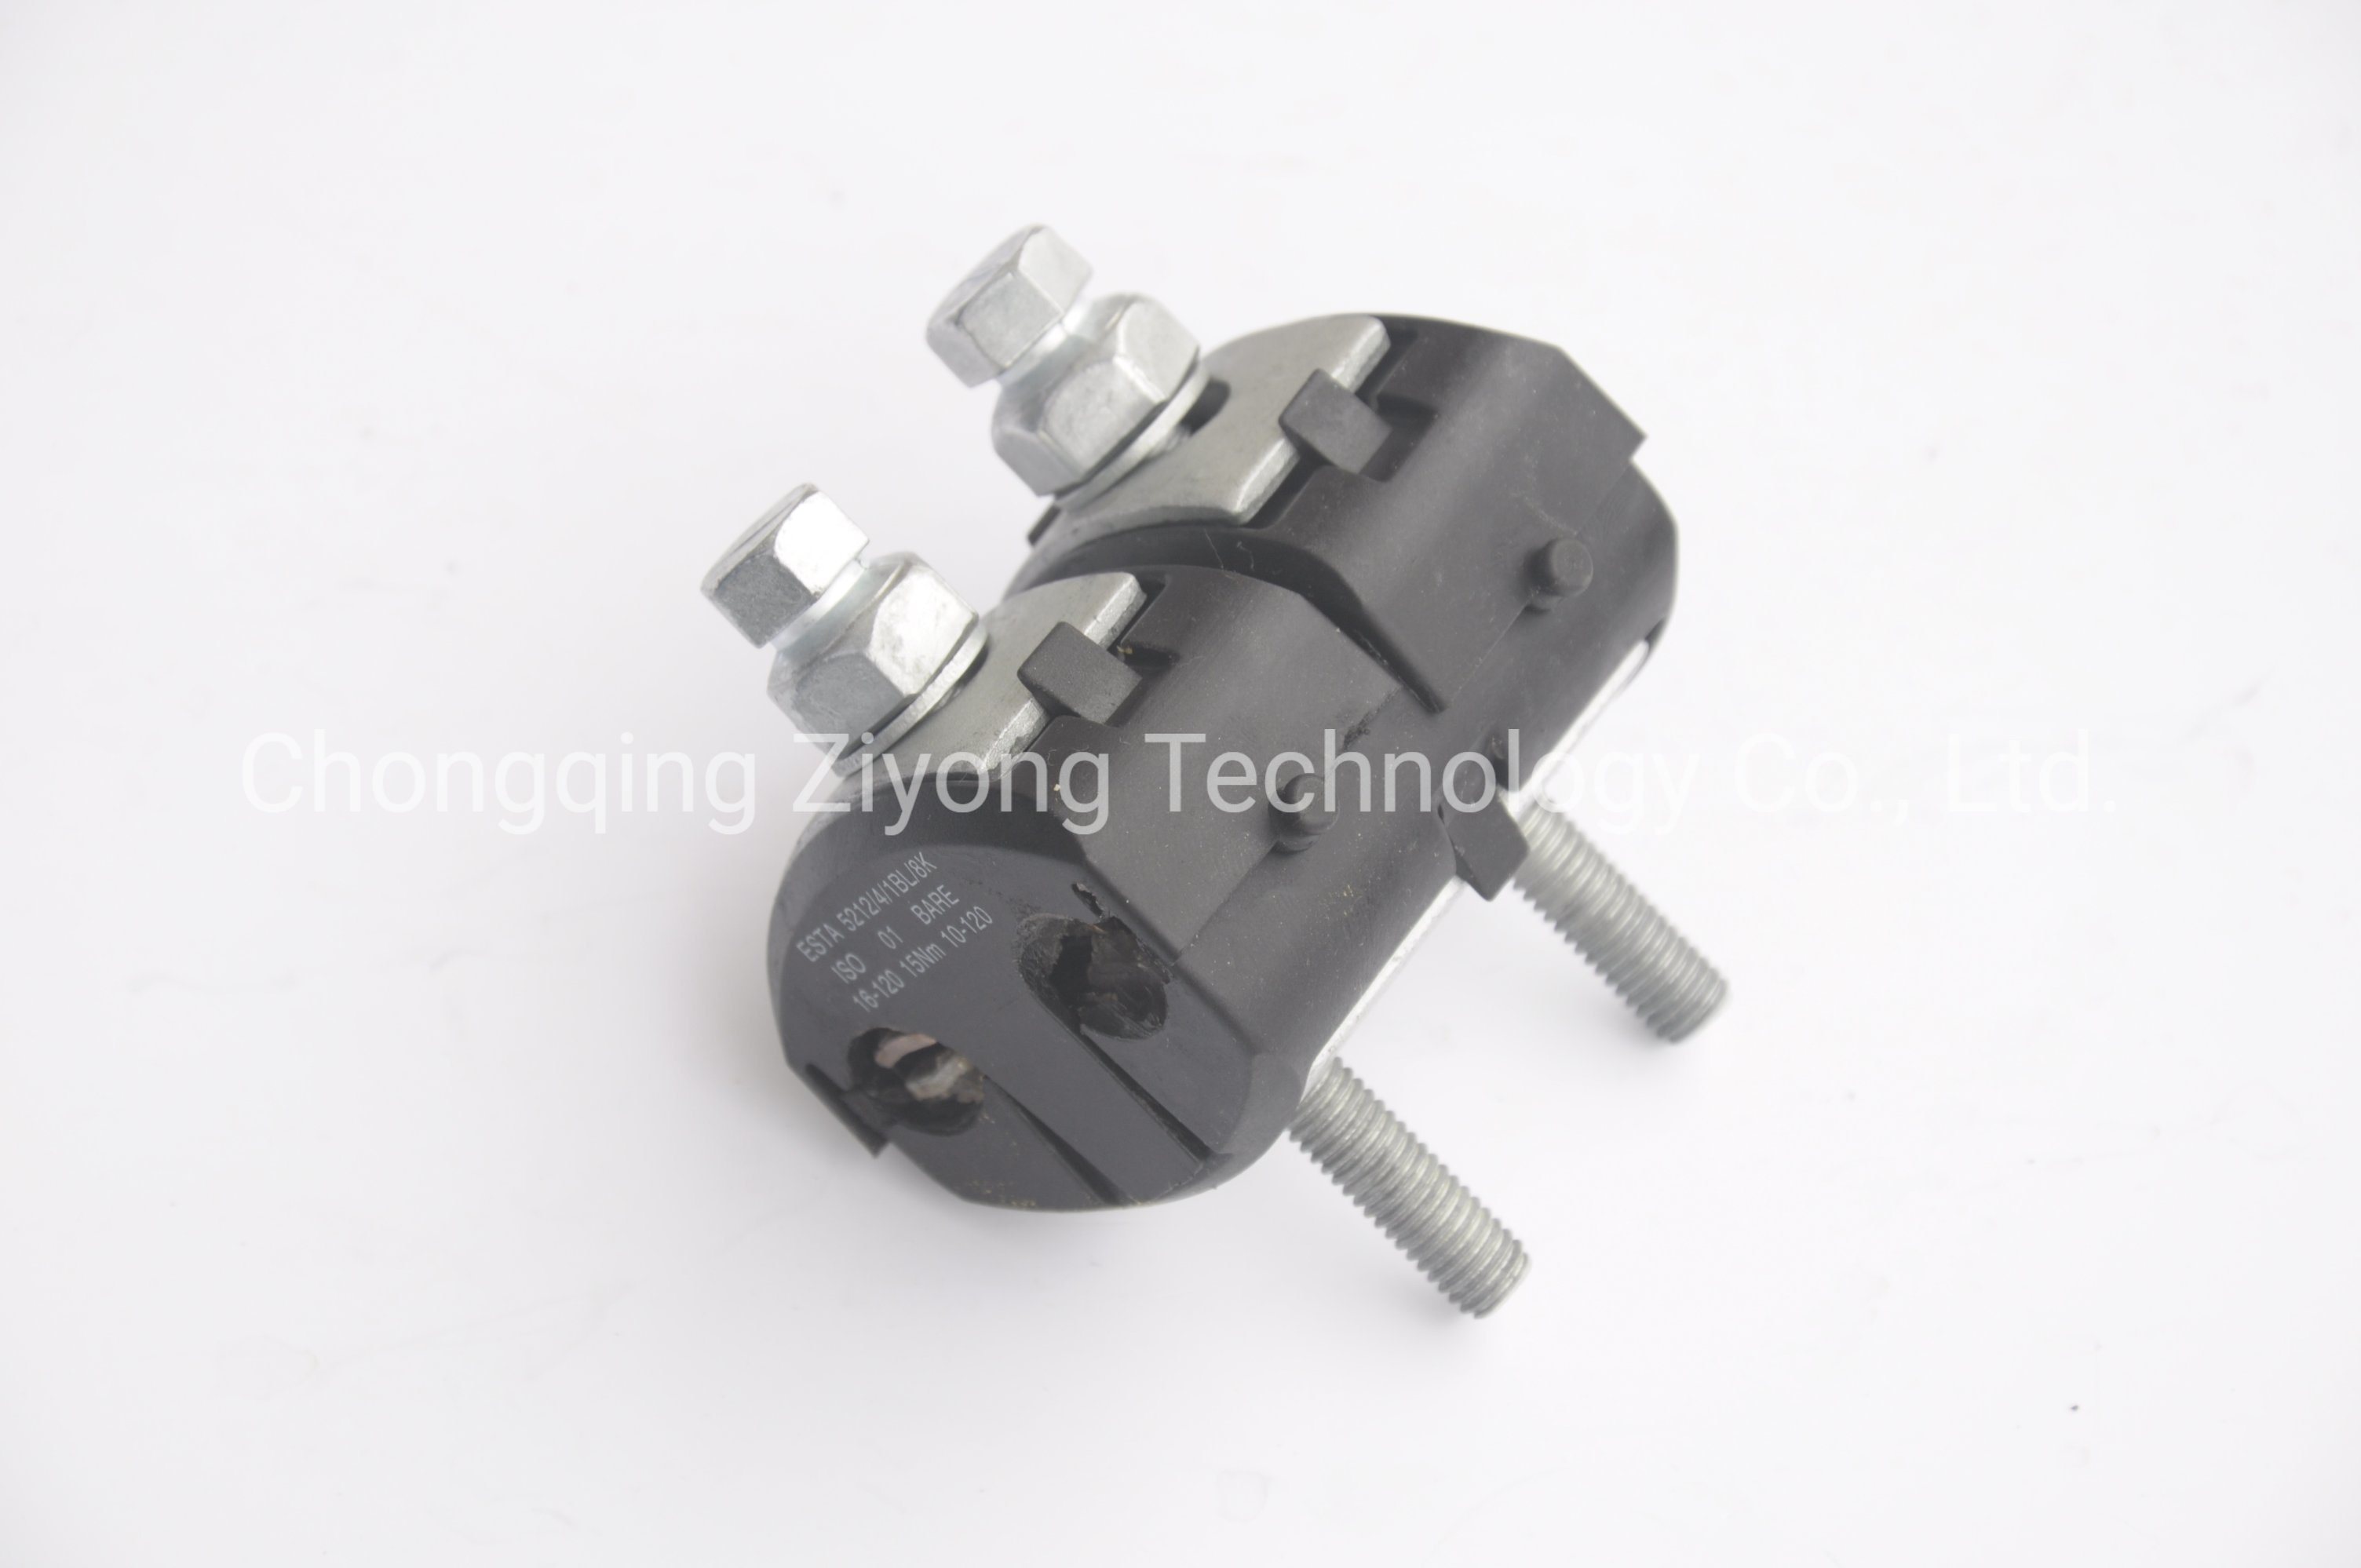 
                Insulation Piercing Connector (IPC) Low Voltage Electric
            